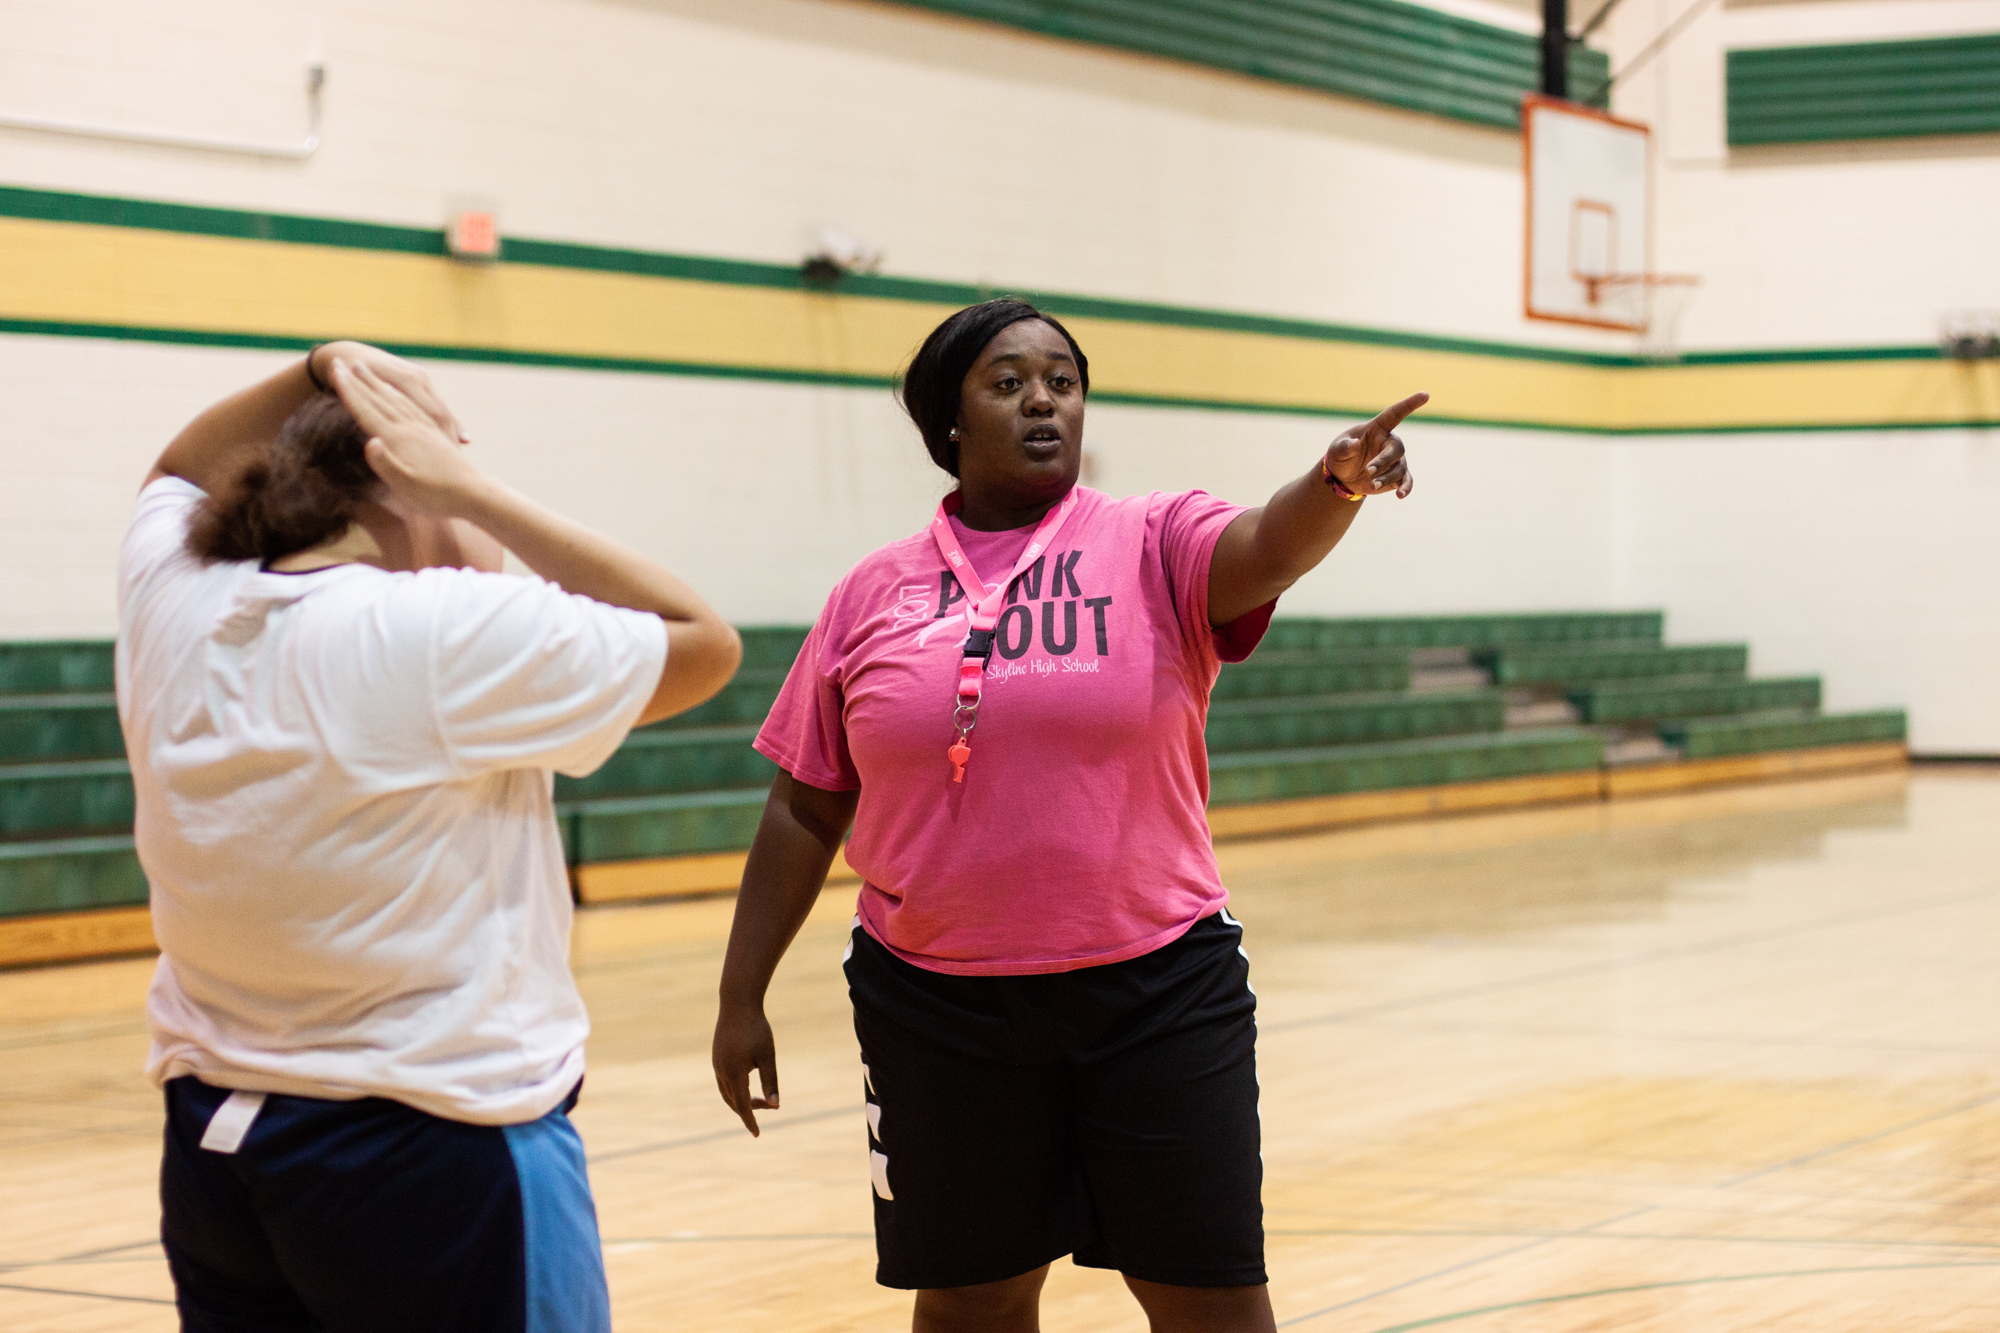  Chiniqua Bright directs students during an afternoon gym class on Oct. 3, 2018. In addition to teaching general physical education classes at Skyline High School, Bright also coaches the girls’ varsity basketball team. 